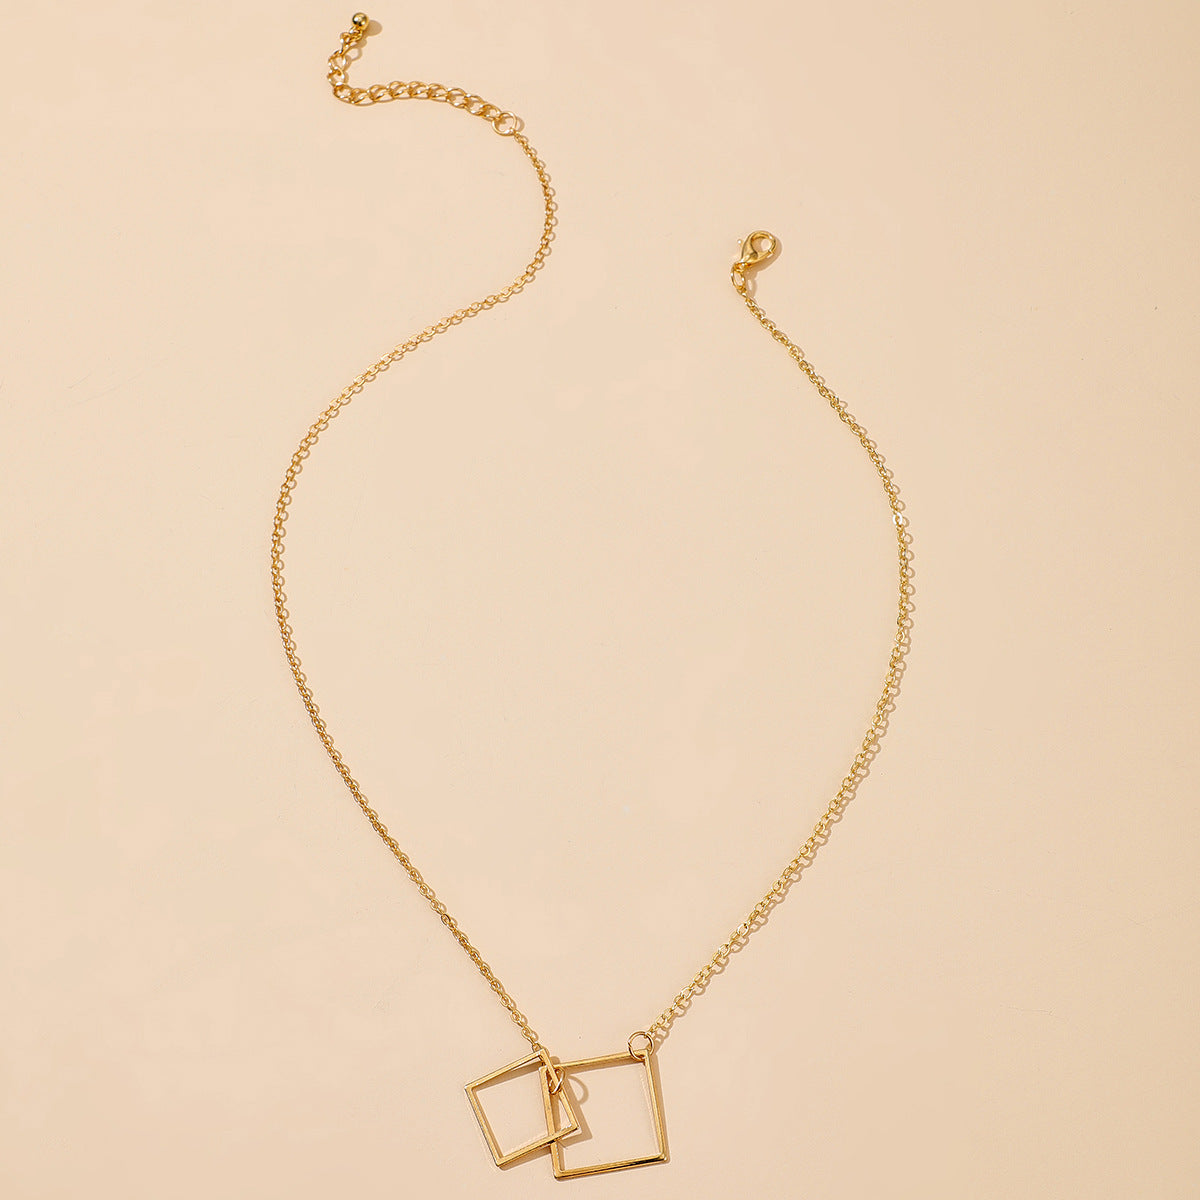 Square Alloy Ins Bohemian Fashion Single-layer Necklace Necklace Necklace Accessories